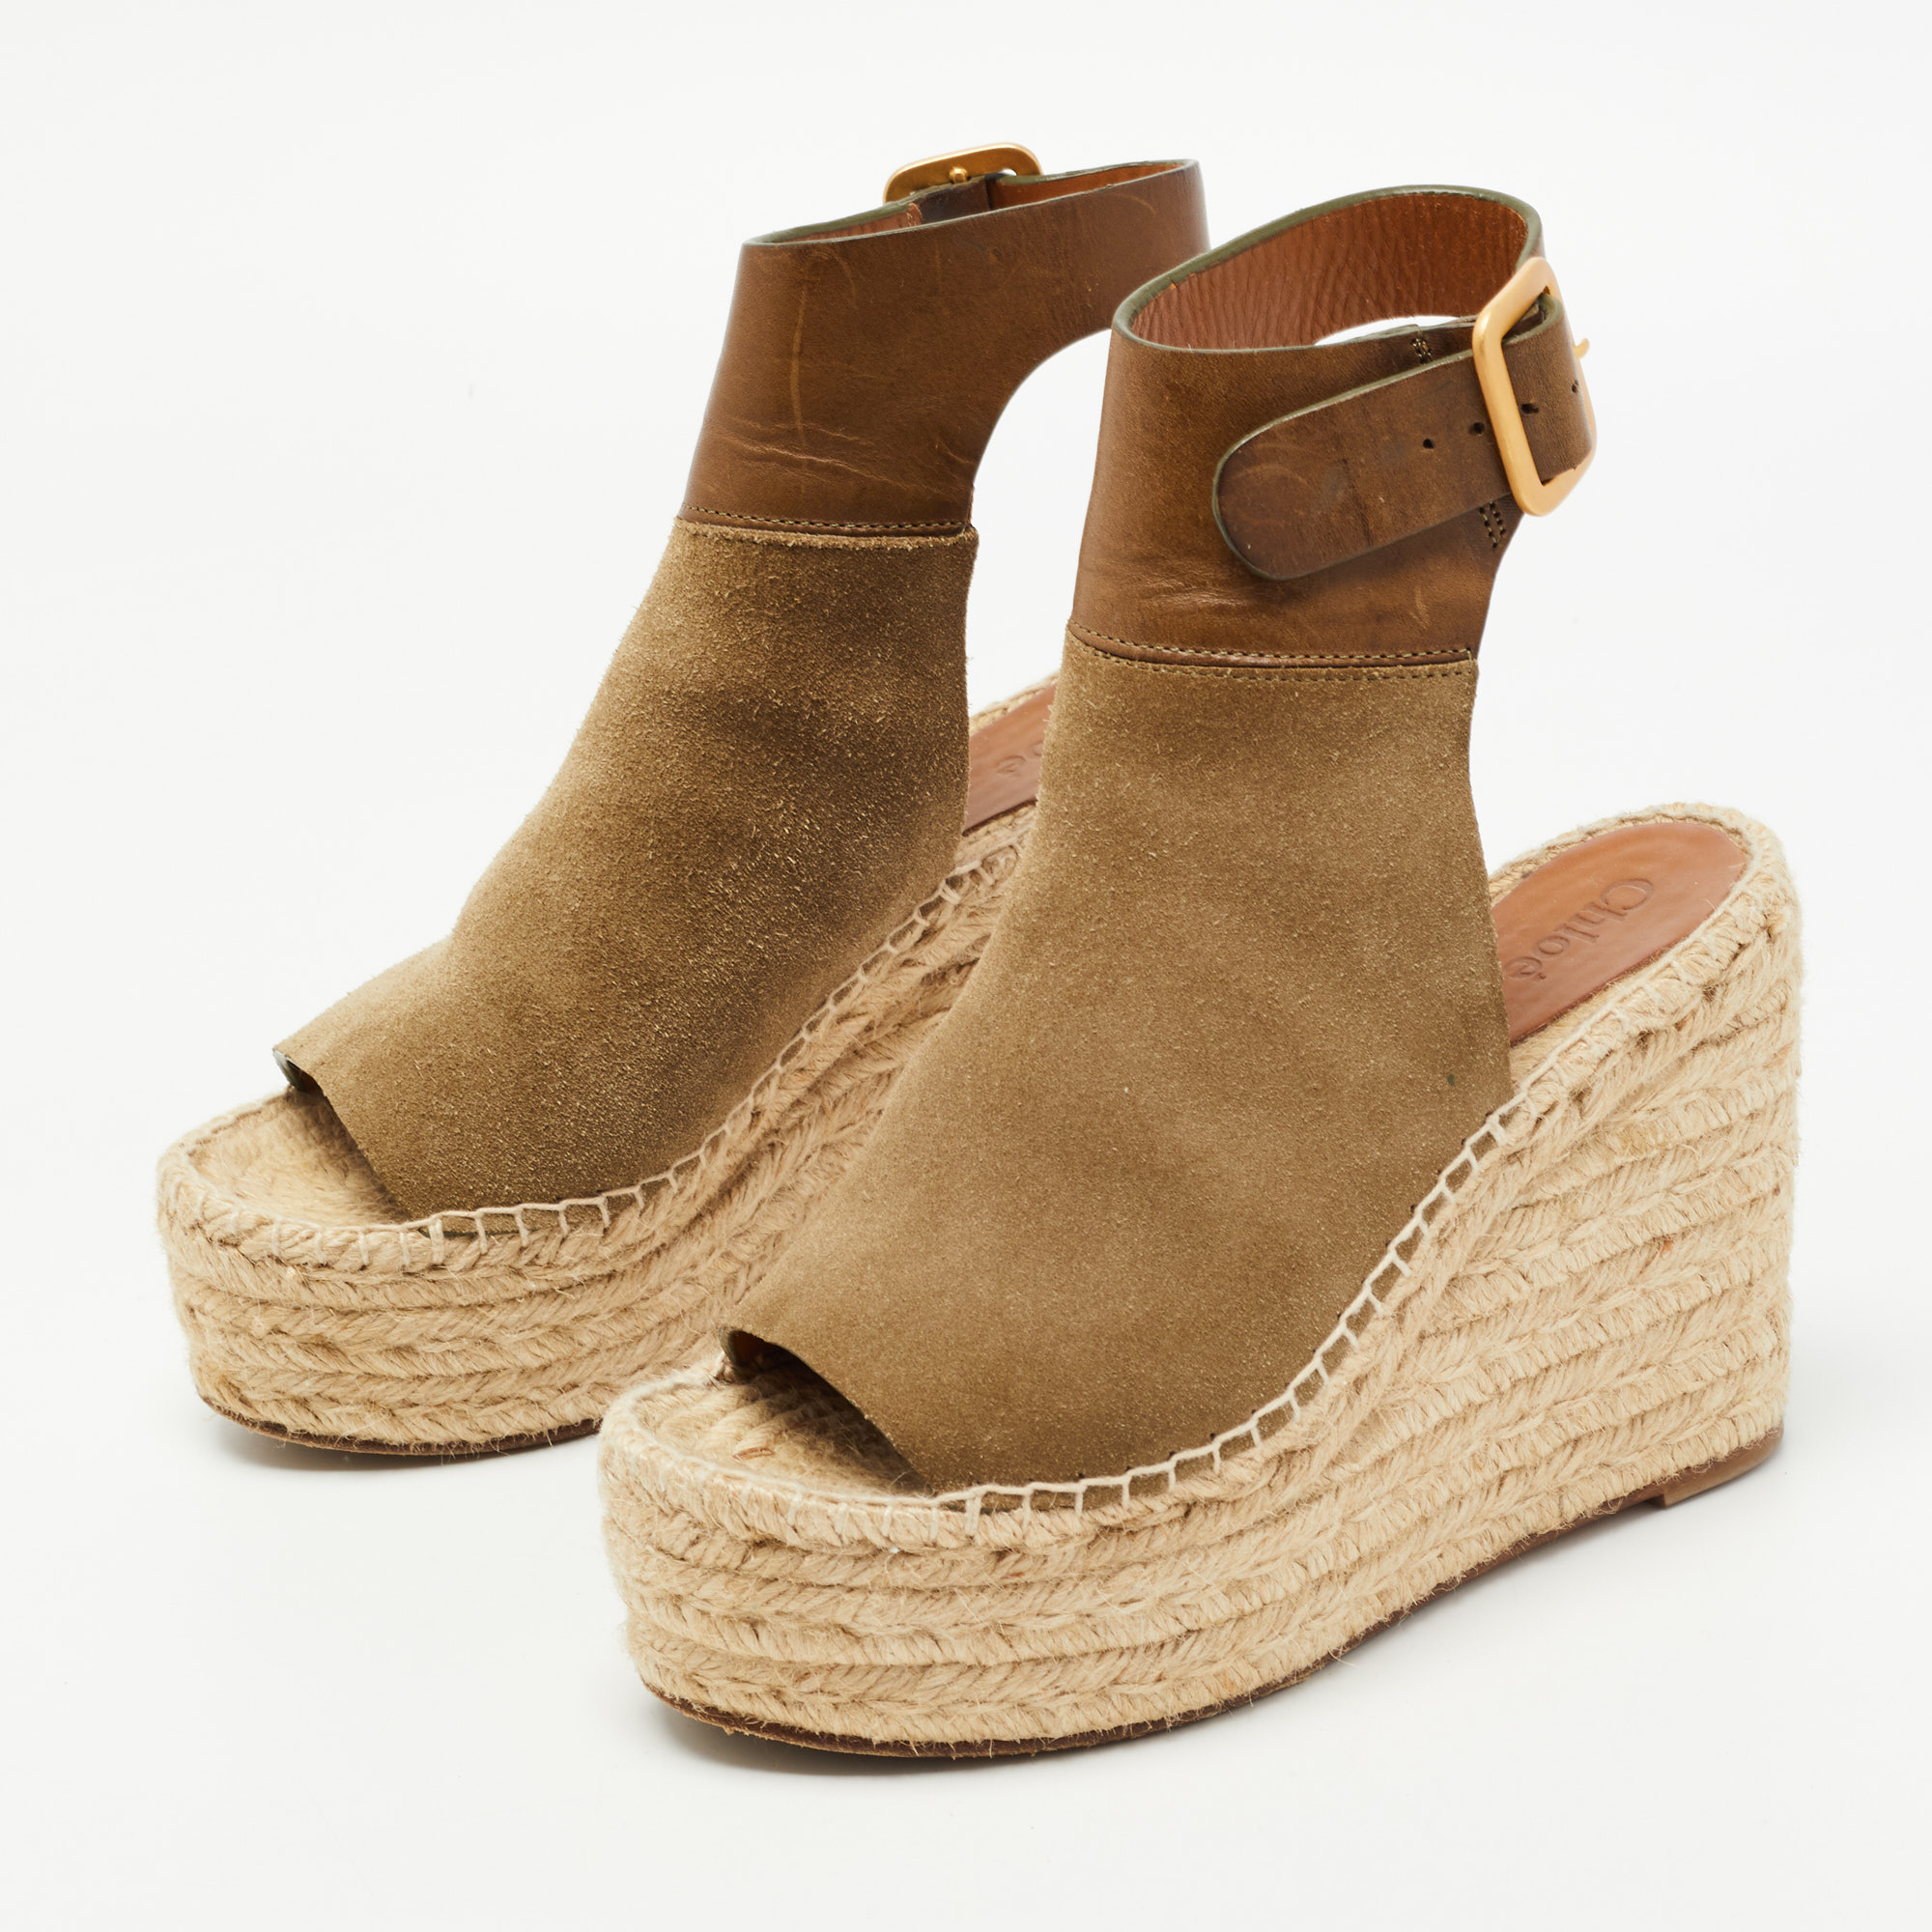 

Chloe Two Tone Leather and Suede Open Toe Espadrille Wedge Platform Ankle Strap Sandals Size, Brown